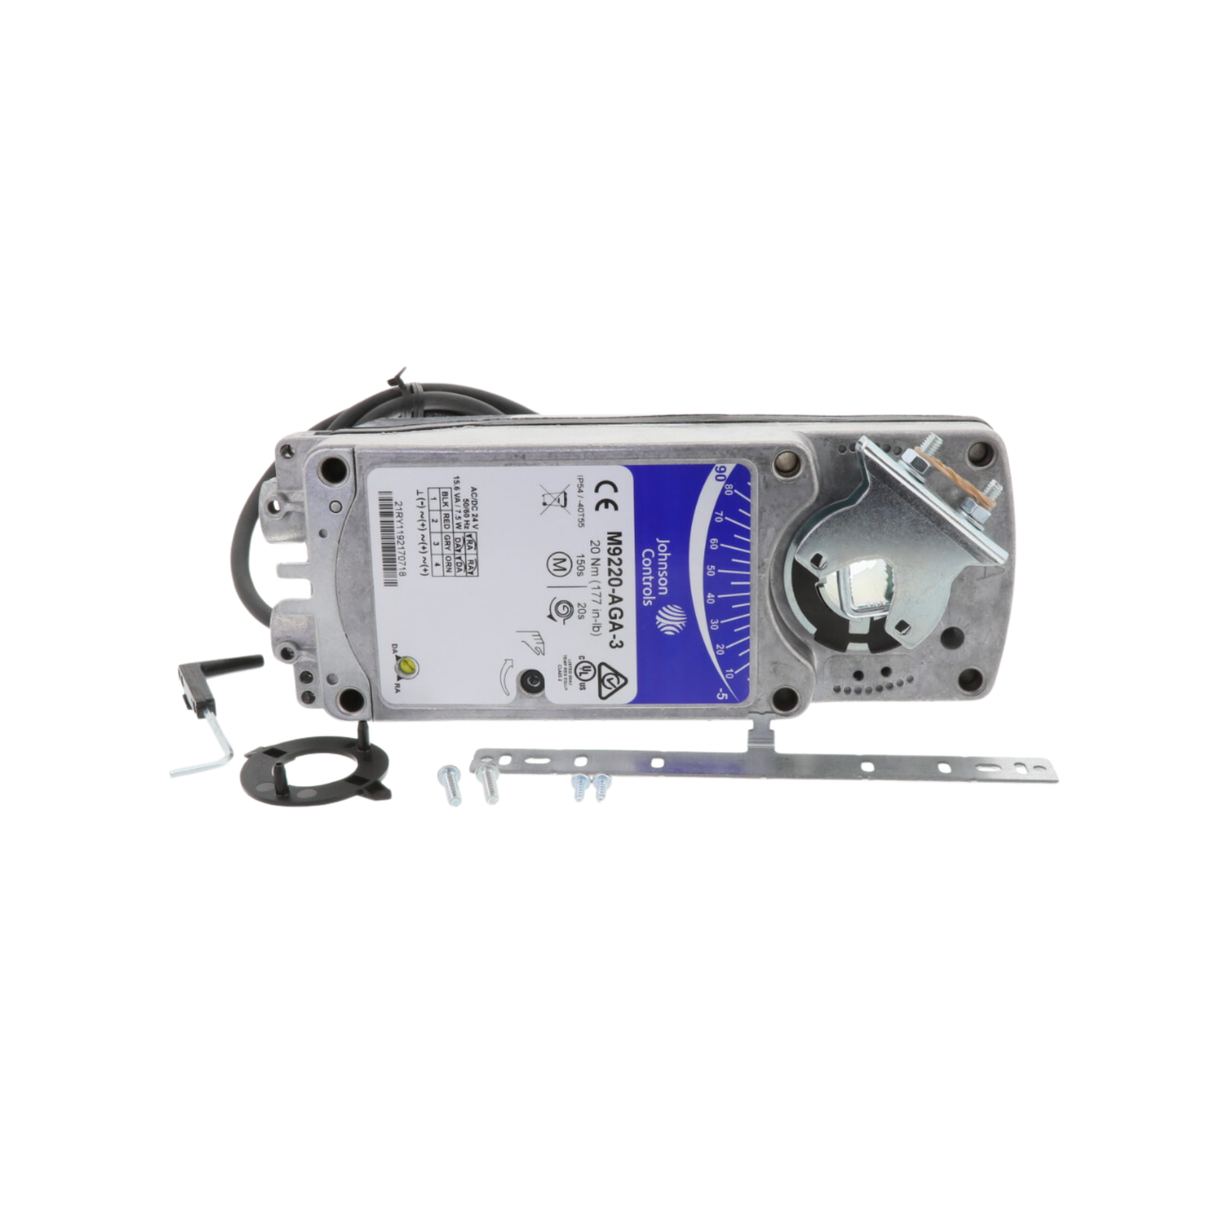 Johnson Controls M9220-AGA-3 24VAC, 24VDC Supply Voltage, Actuator with 48" Cable with Wire Leads